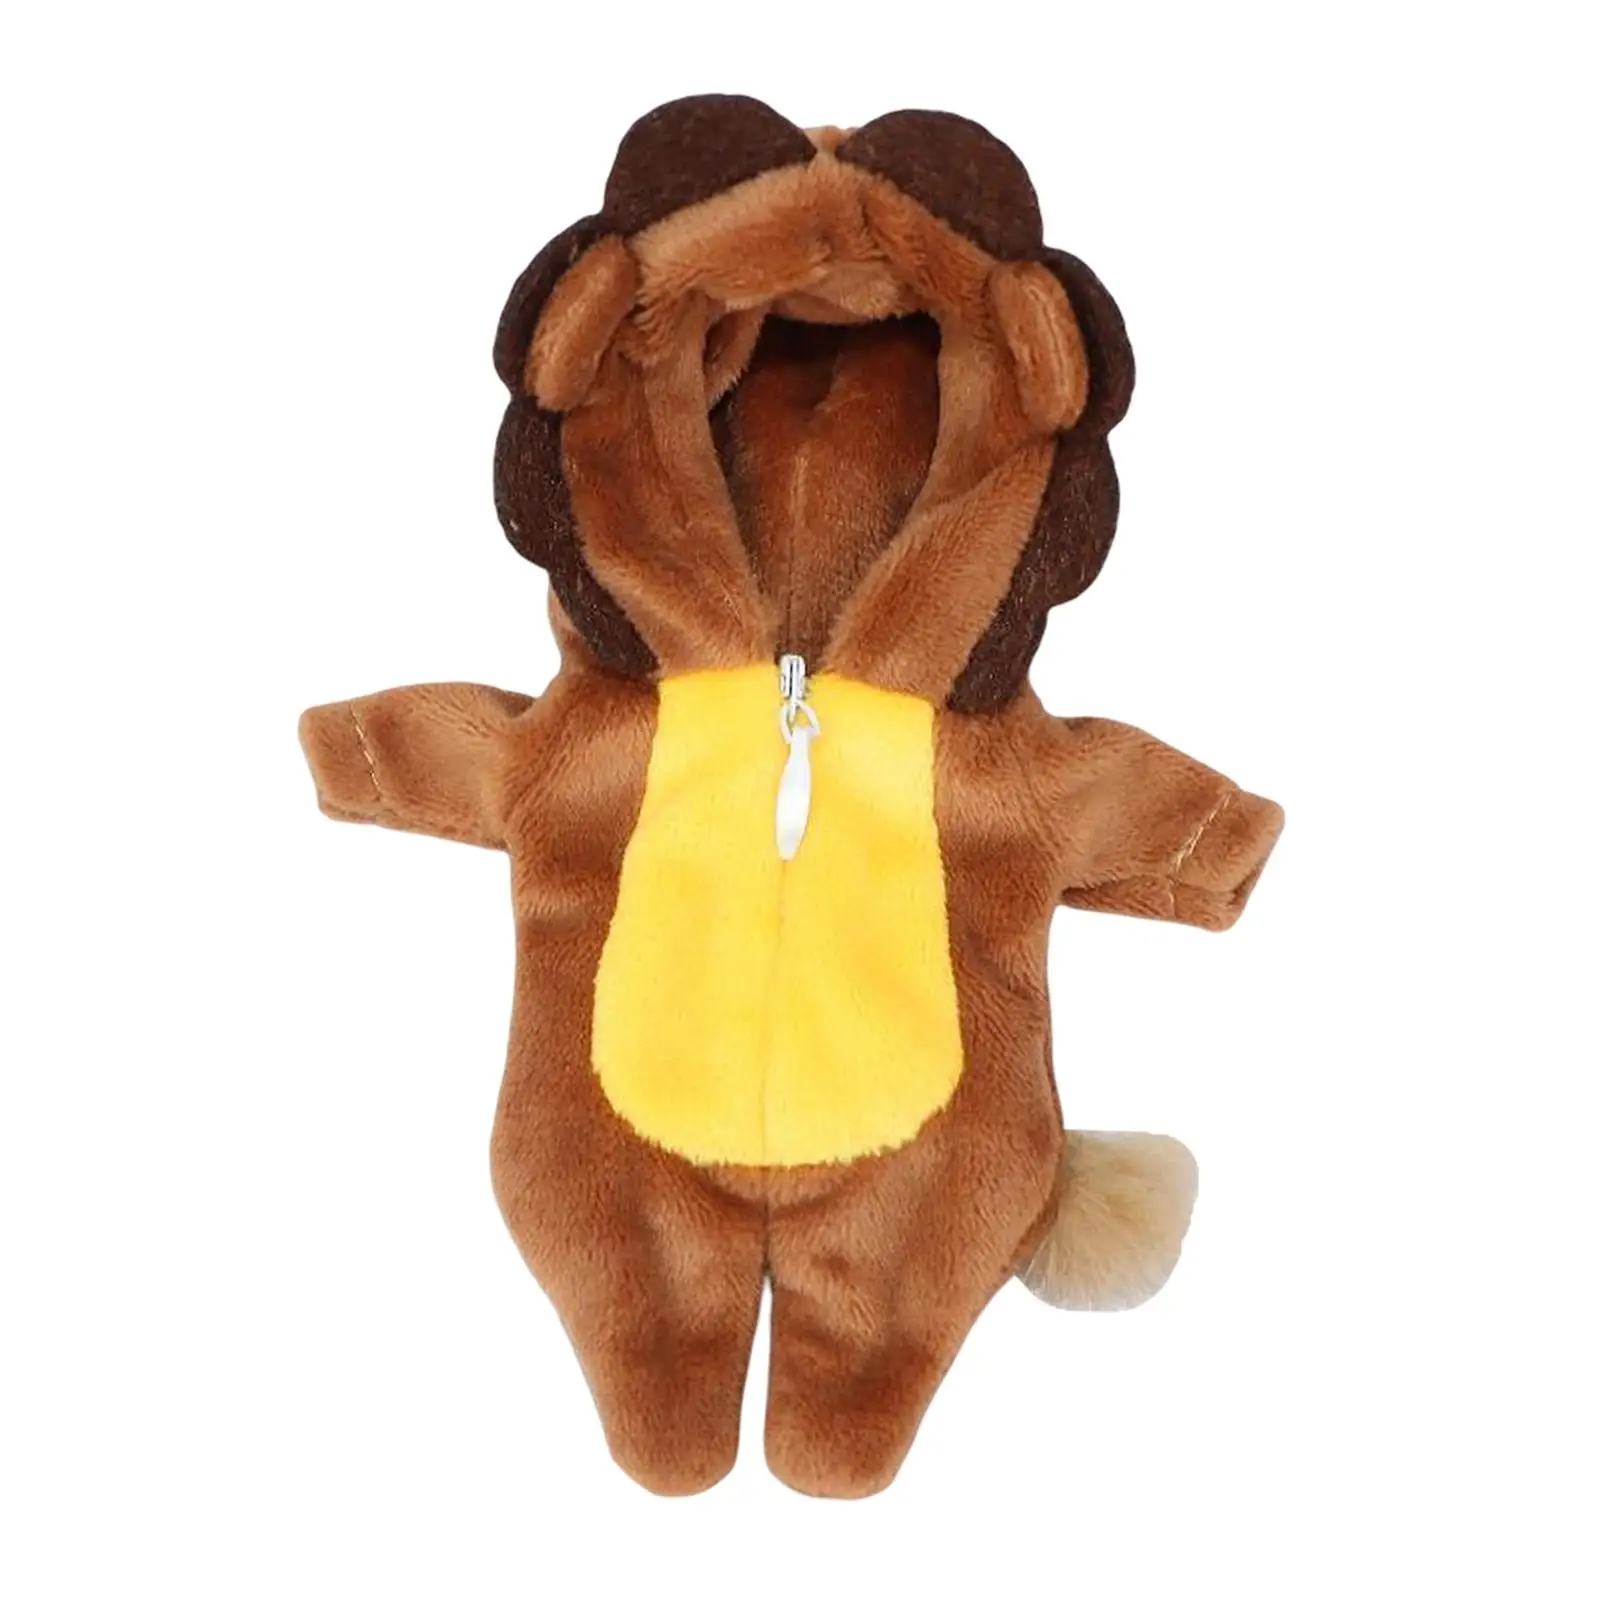 Cute Doll Clothes 1:12 Doll Clothes Animal Shaped with Zipper Gift DIY Plush Clothing Doll Accessories for Ob11 for Gsc Boys